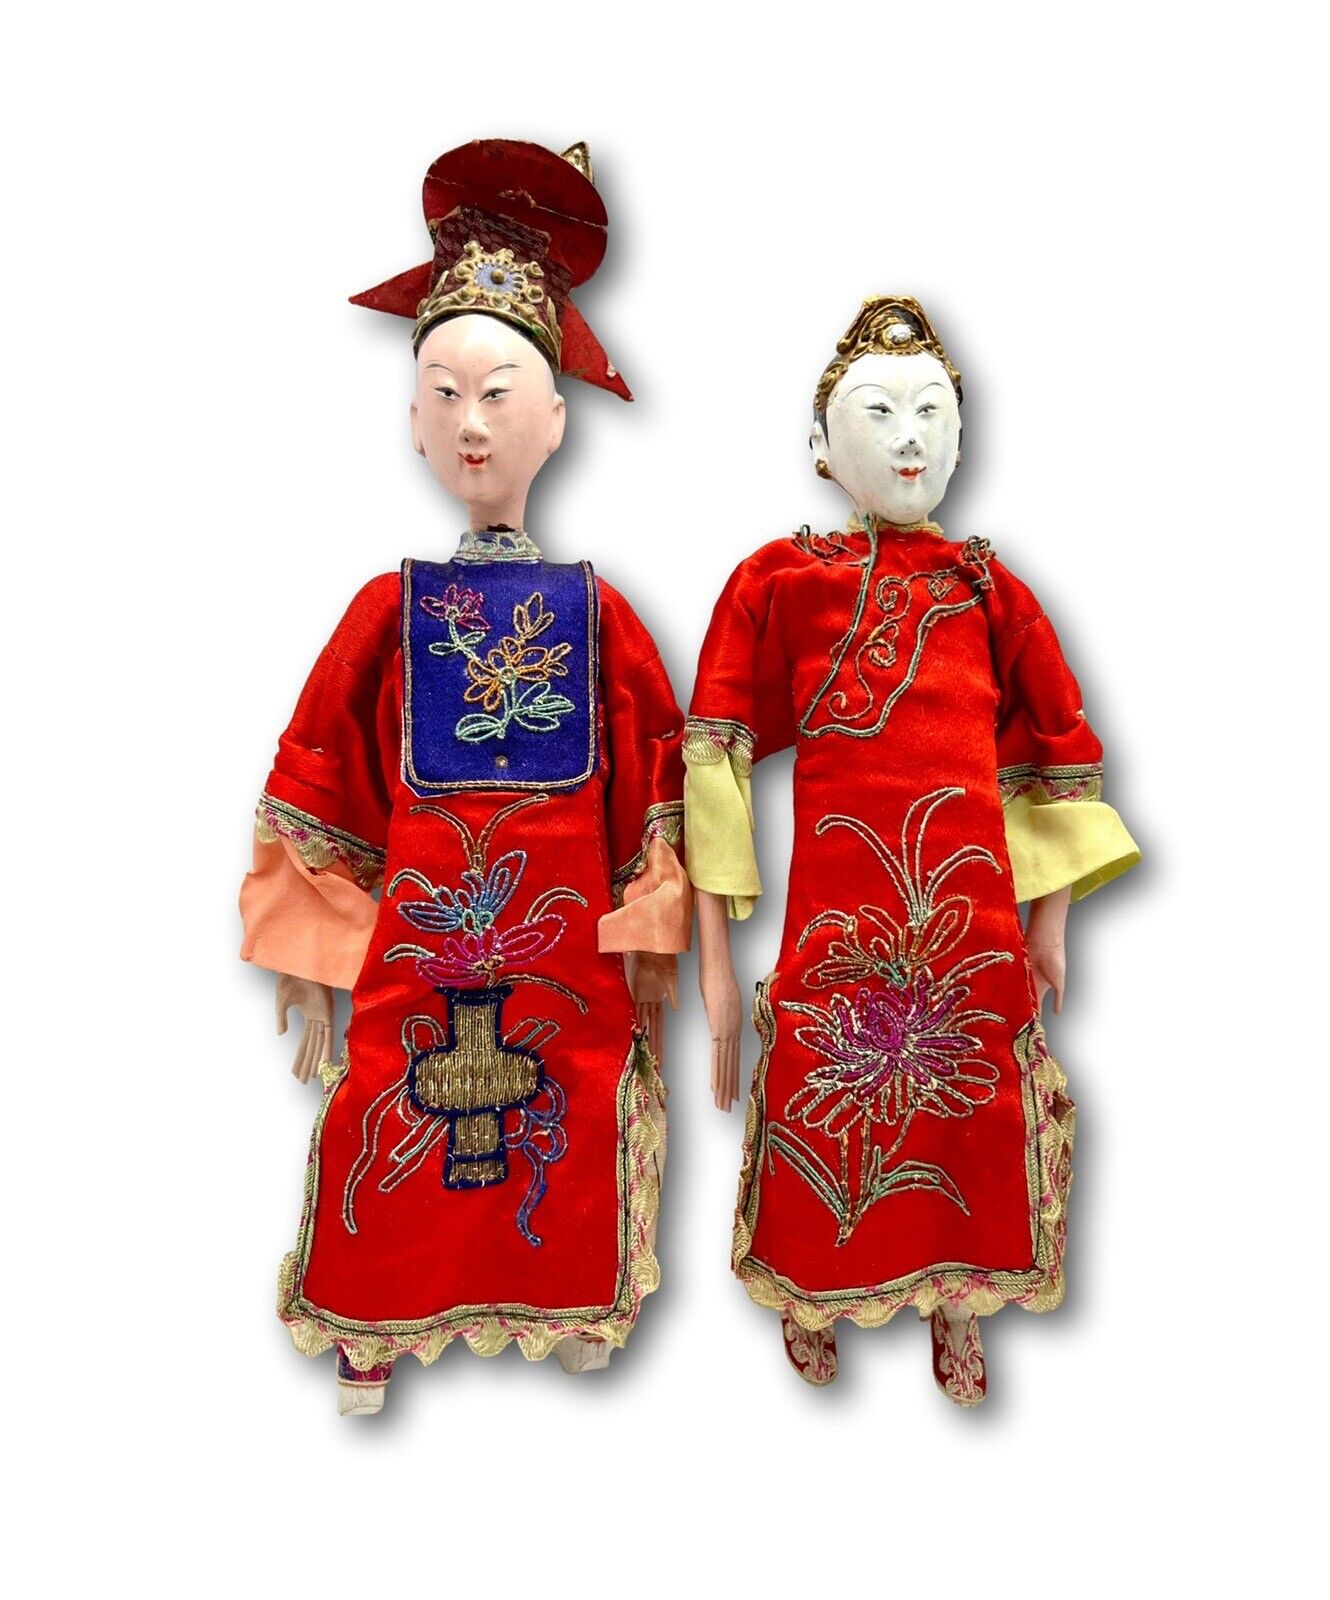 ANTIQUE PAIR OF CHINESE OPERA DOLLS ELABORATE SILK EMBROIDERED DRESS